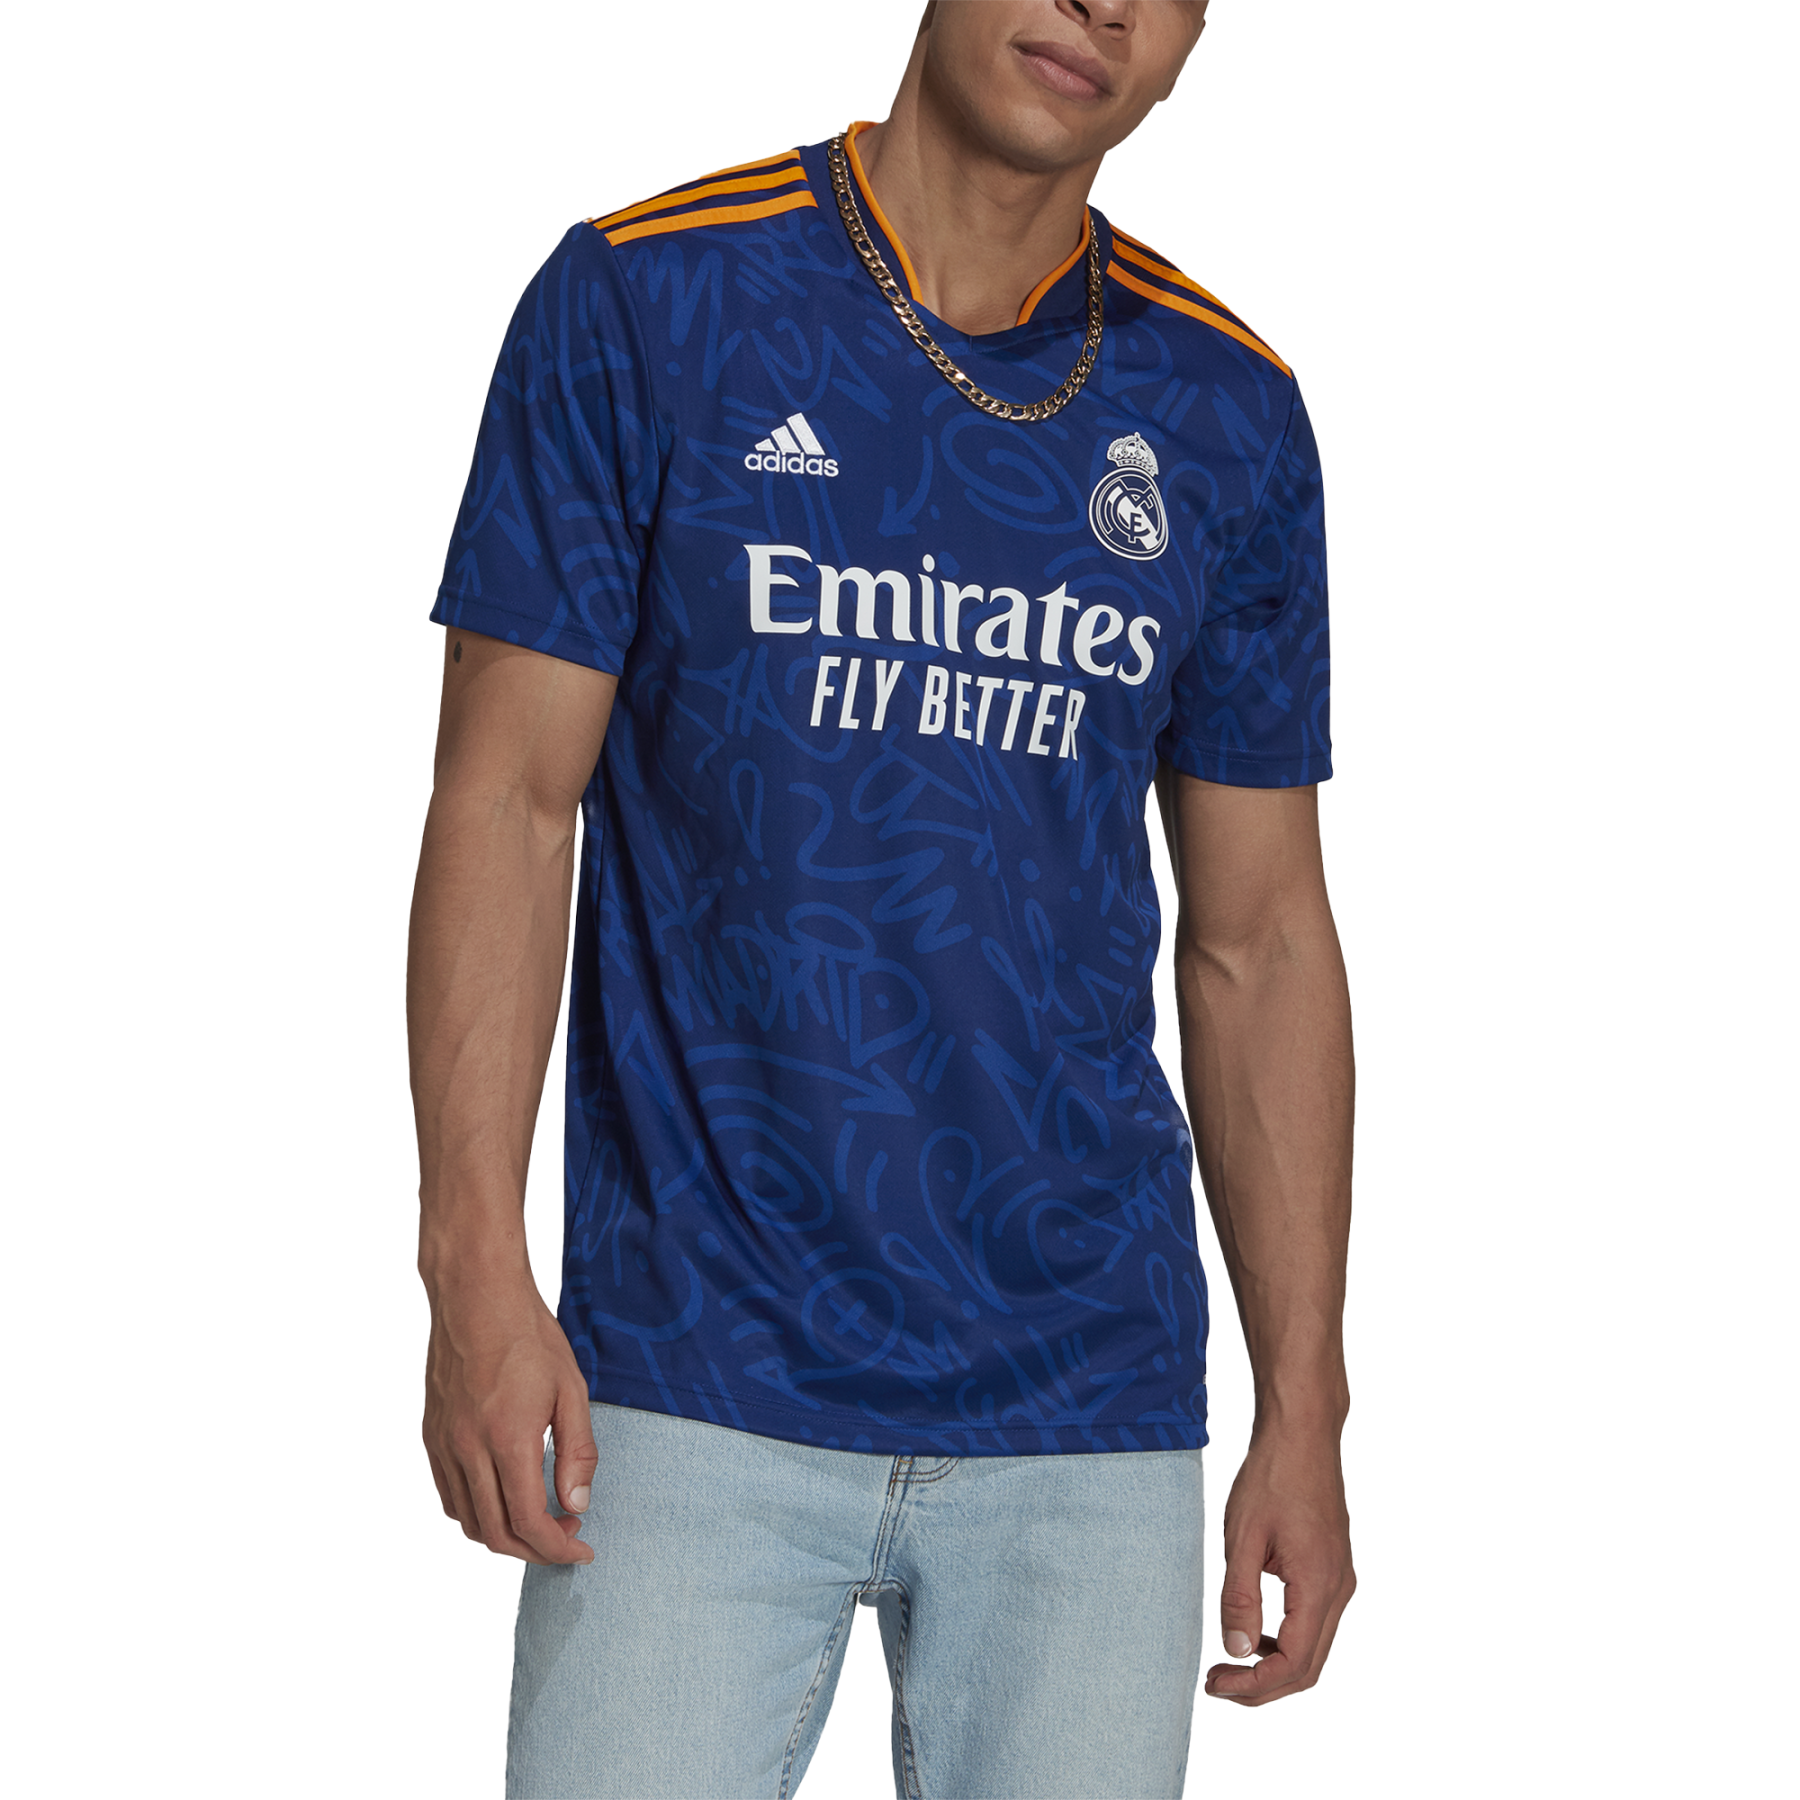 Outdoor jersey Real Madrid 2021/22